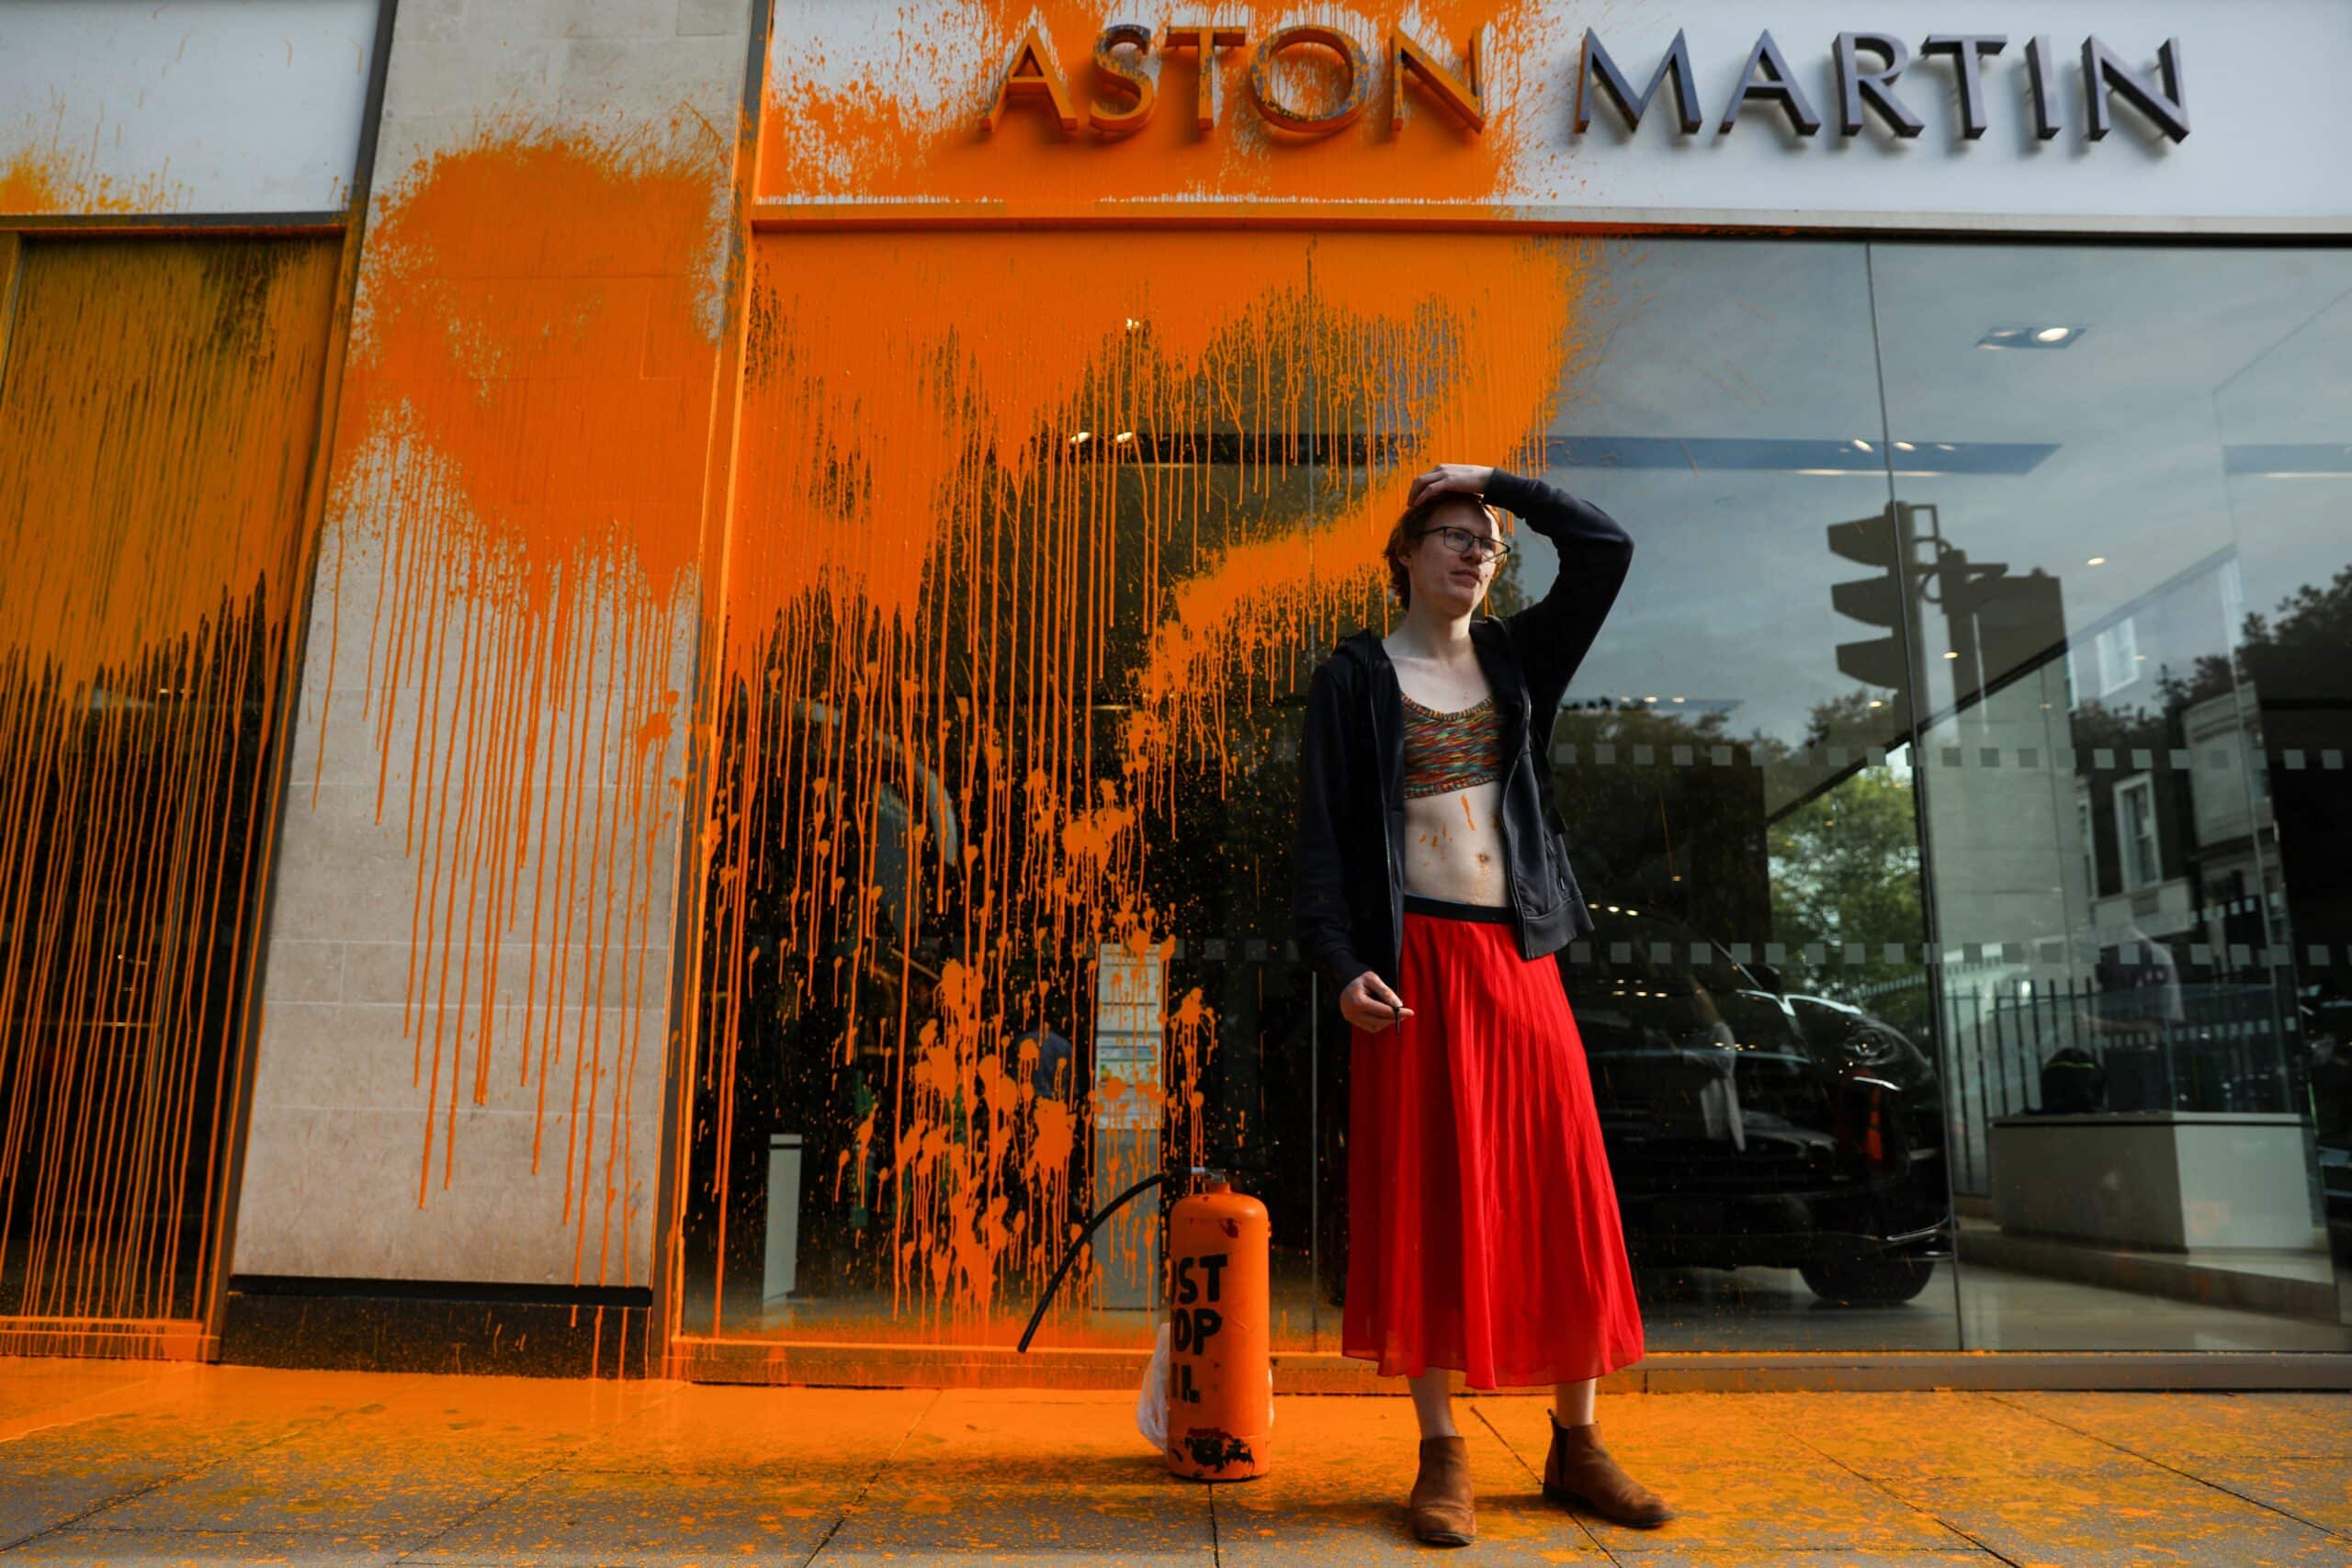 A member of the environmental activist group Just Stop Oil reacts after spraying orange paint on the window shop of the Aston Martin car show room, in central London, on October 16, 2022 as part of a series of actions. - Just Stop Oil, which wants an end to new fossil fuel licensing and production, are involved in a month-long series of protests in central London. (Photo by ISABEL INFANTES / AFP)